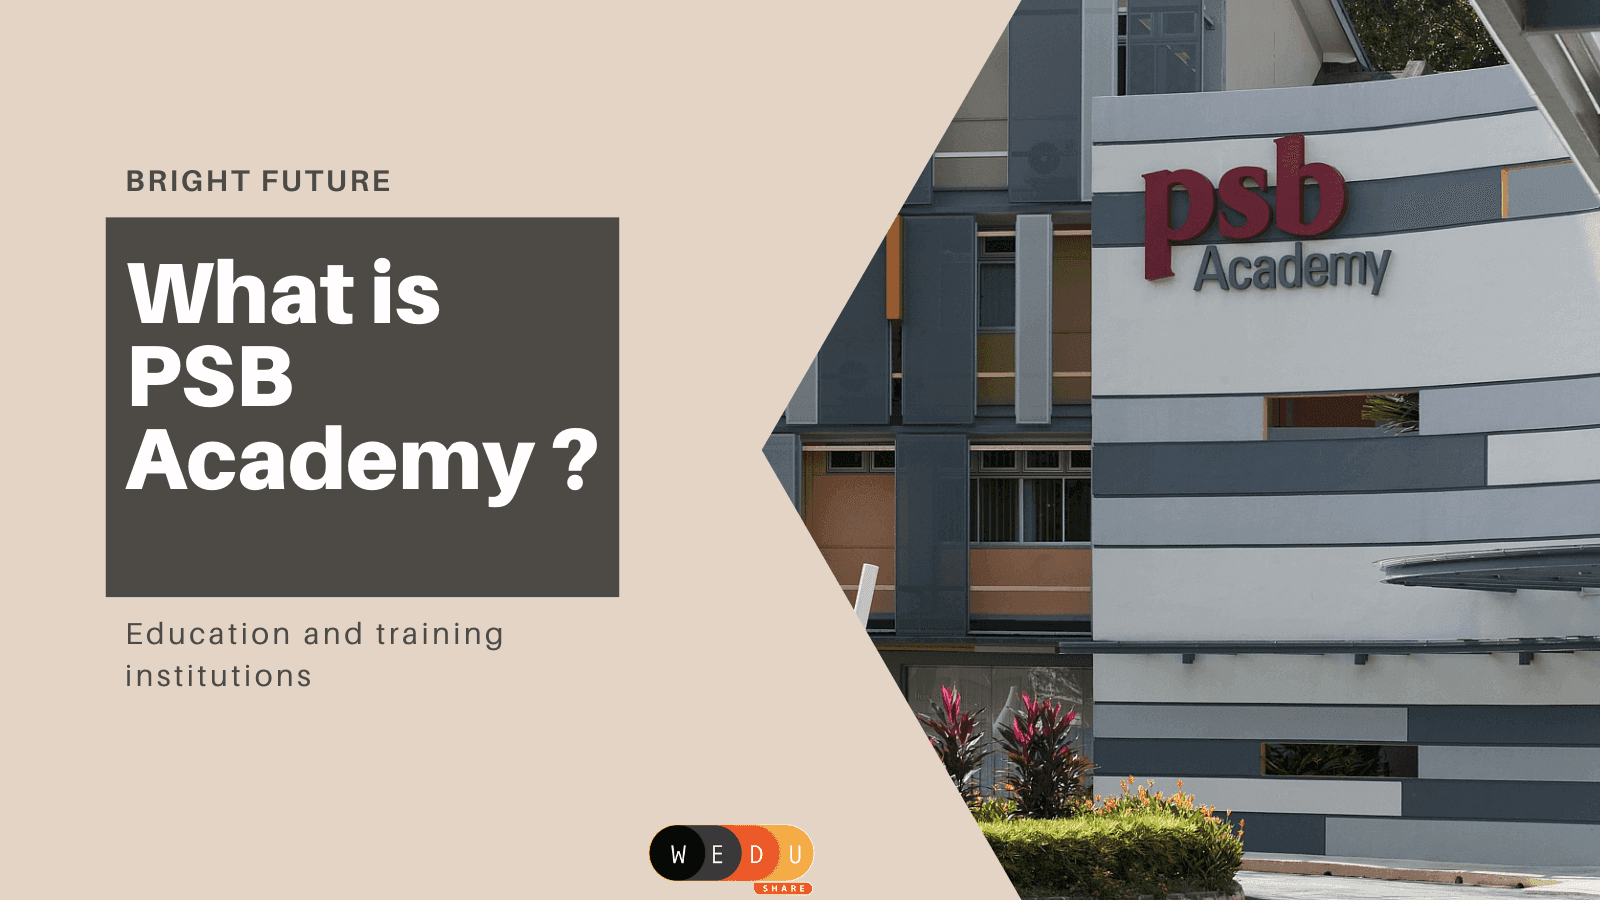 What is PSB Academy?